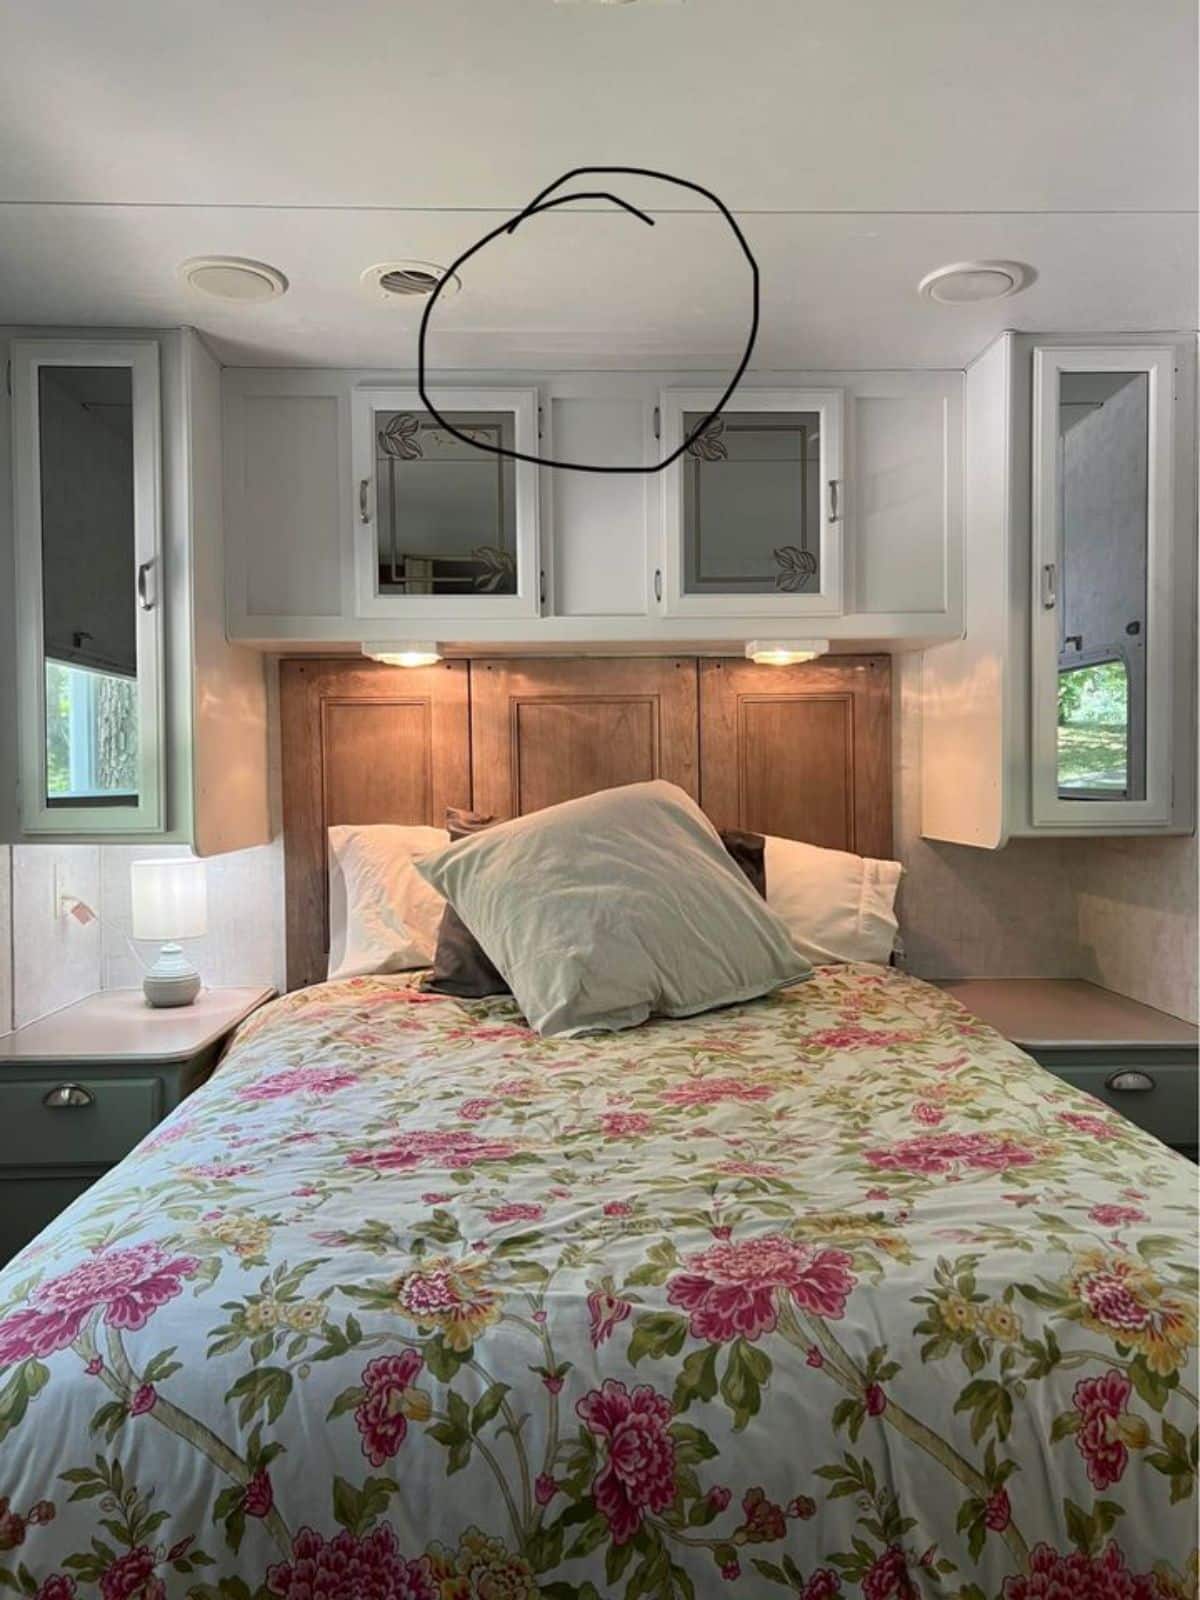 Bedroom of Remodeled Tiny House has a cozy bed and storage cabinets with side tables